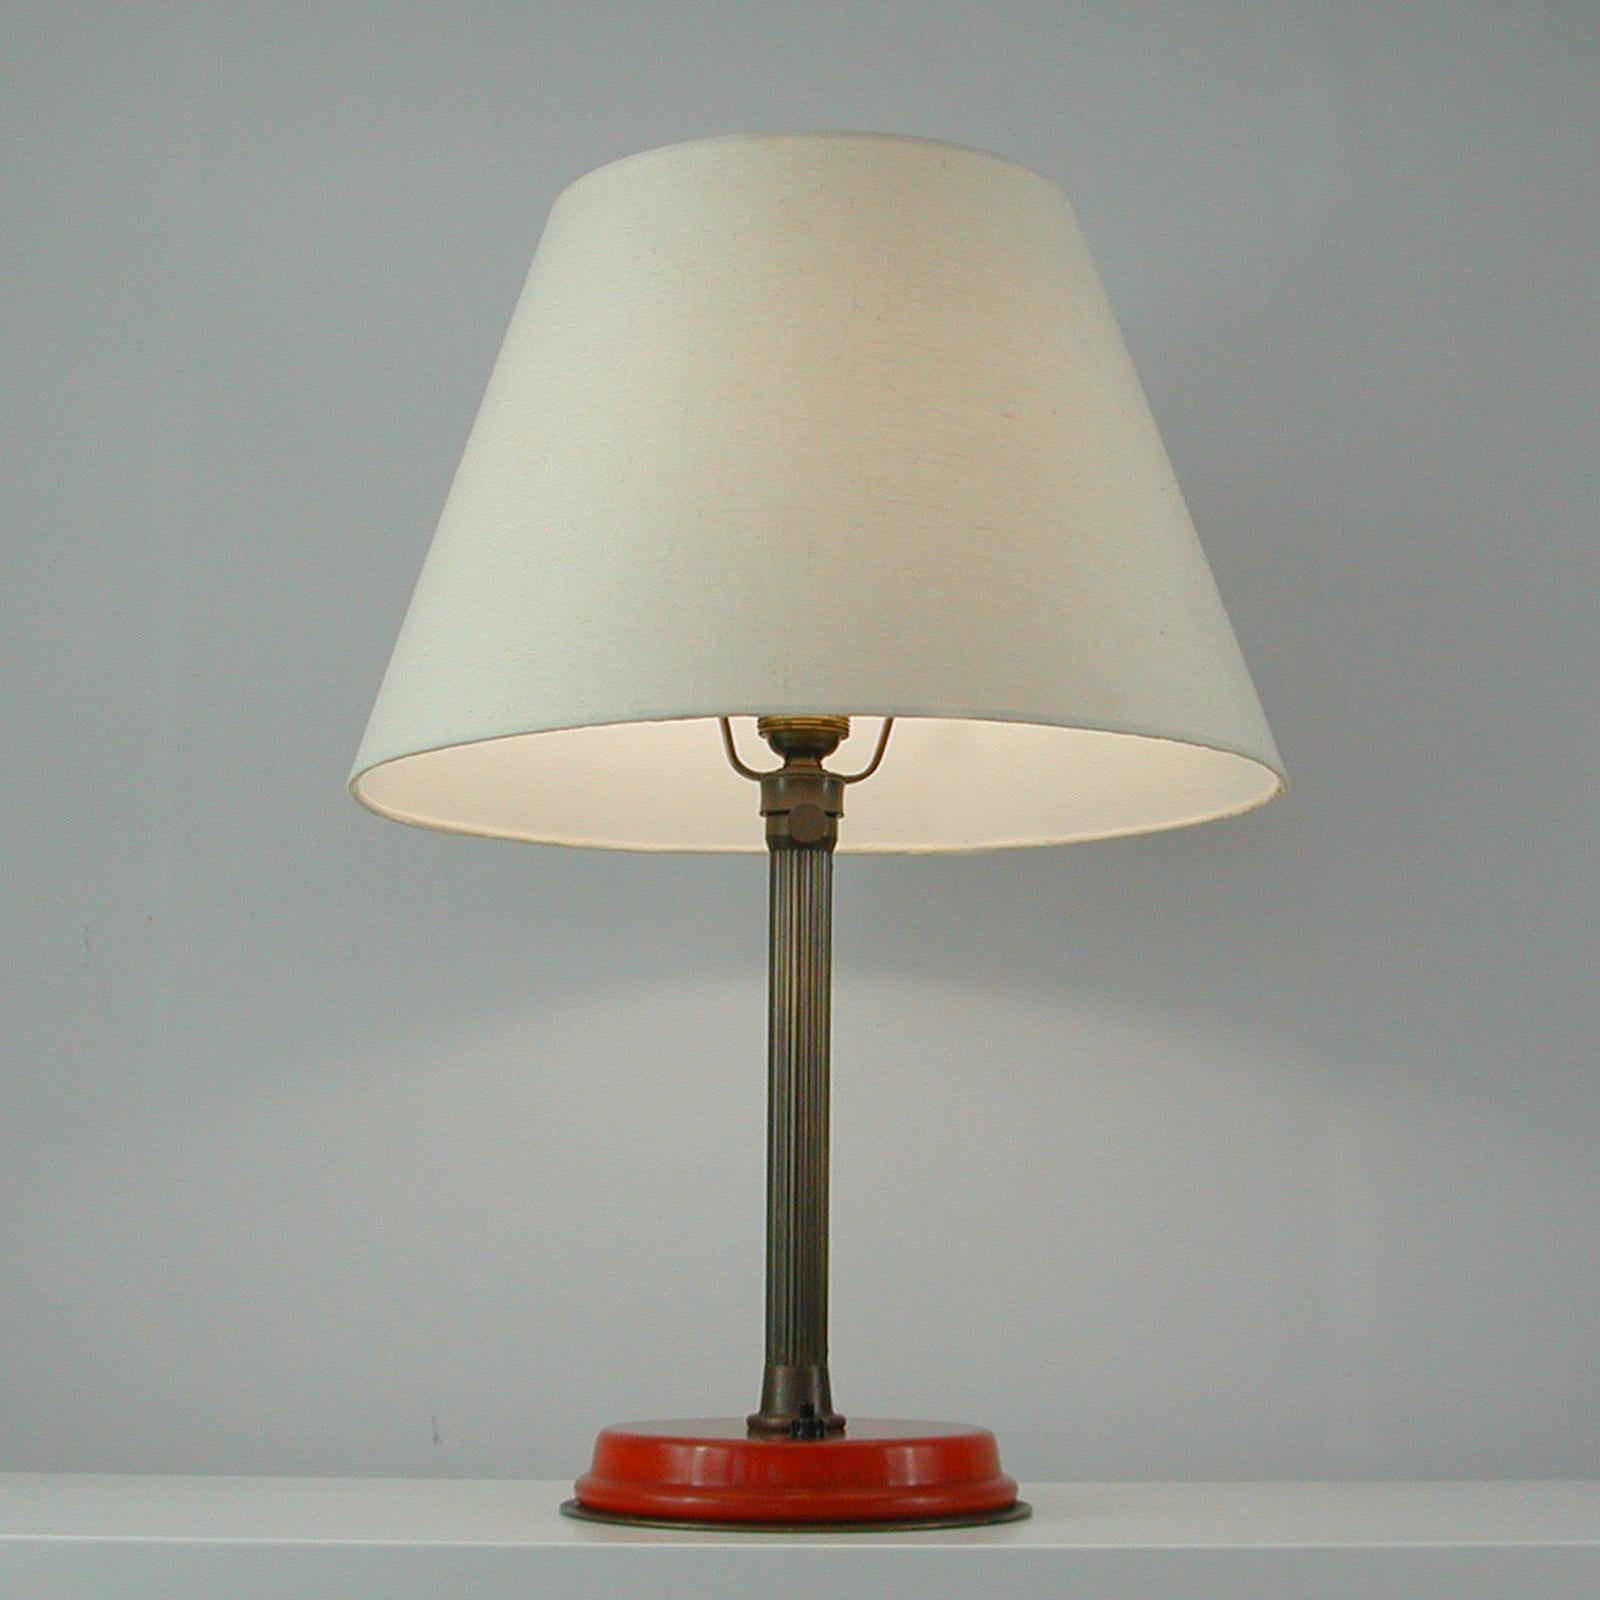 German Art Deco Height Adjustable Bronzed Brass and Bakelite Table Lamp, 1930s For Sale 7